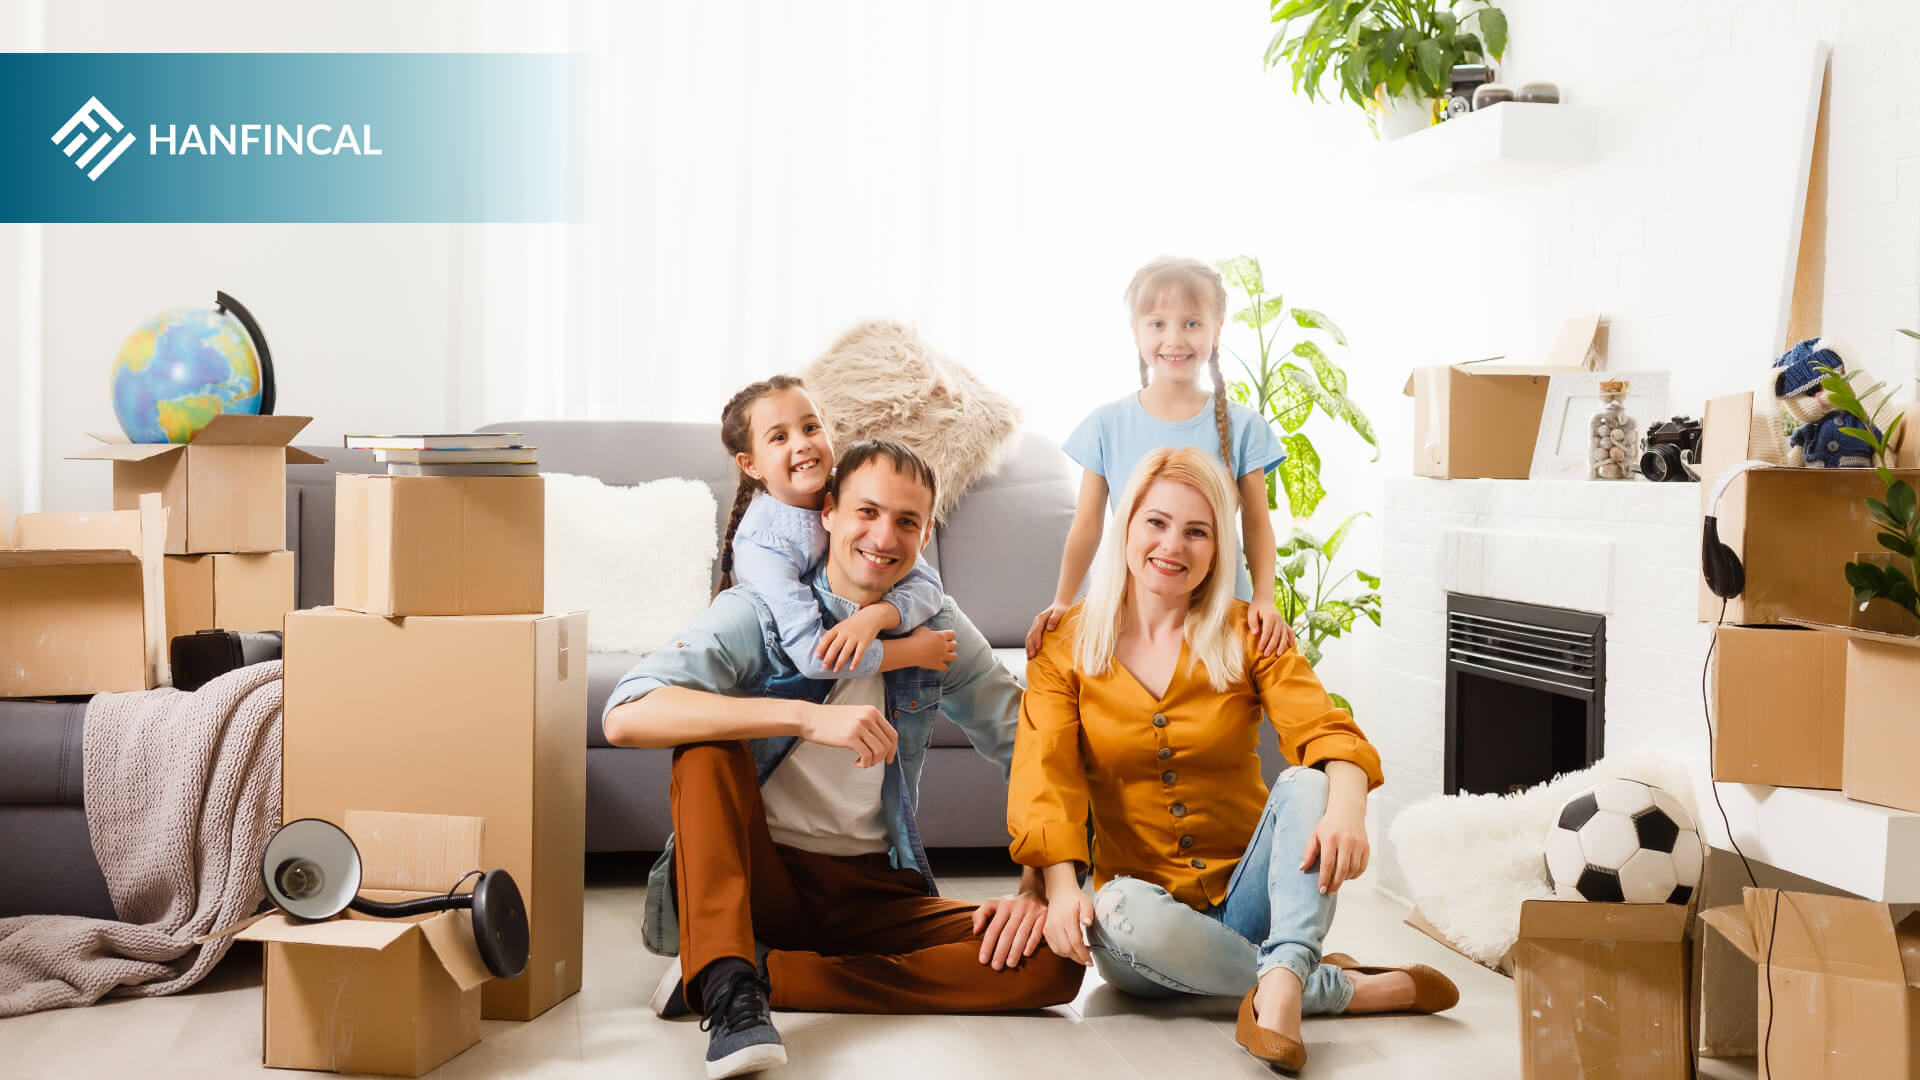 Do I qualify as a first-time home buyer?